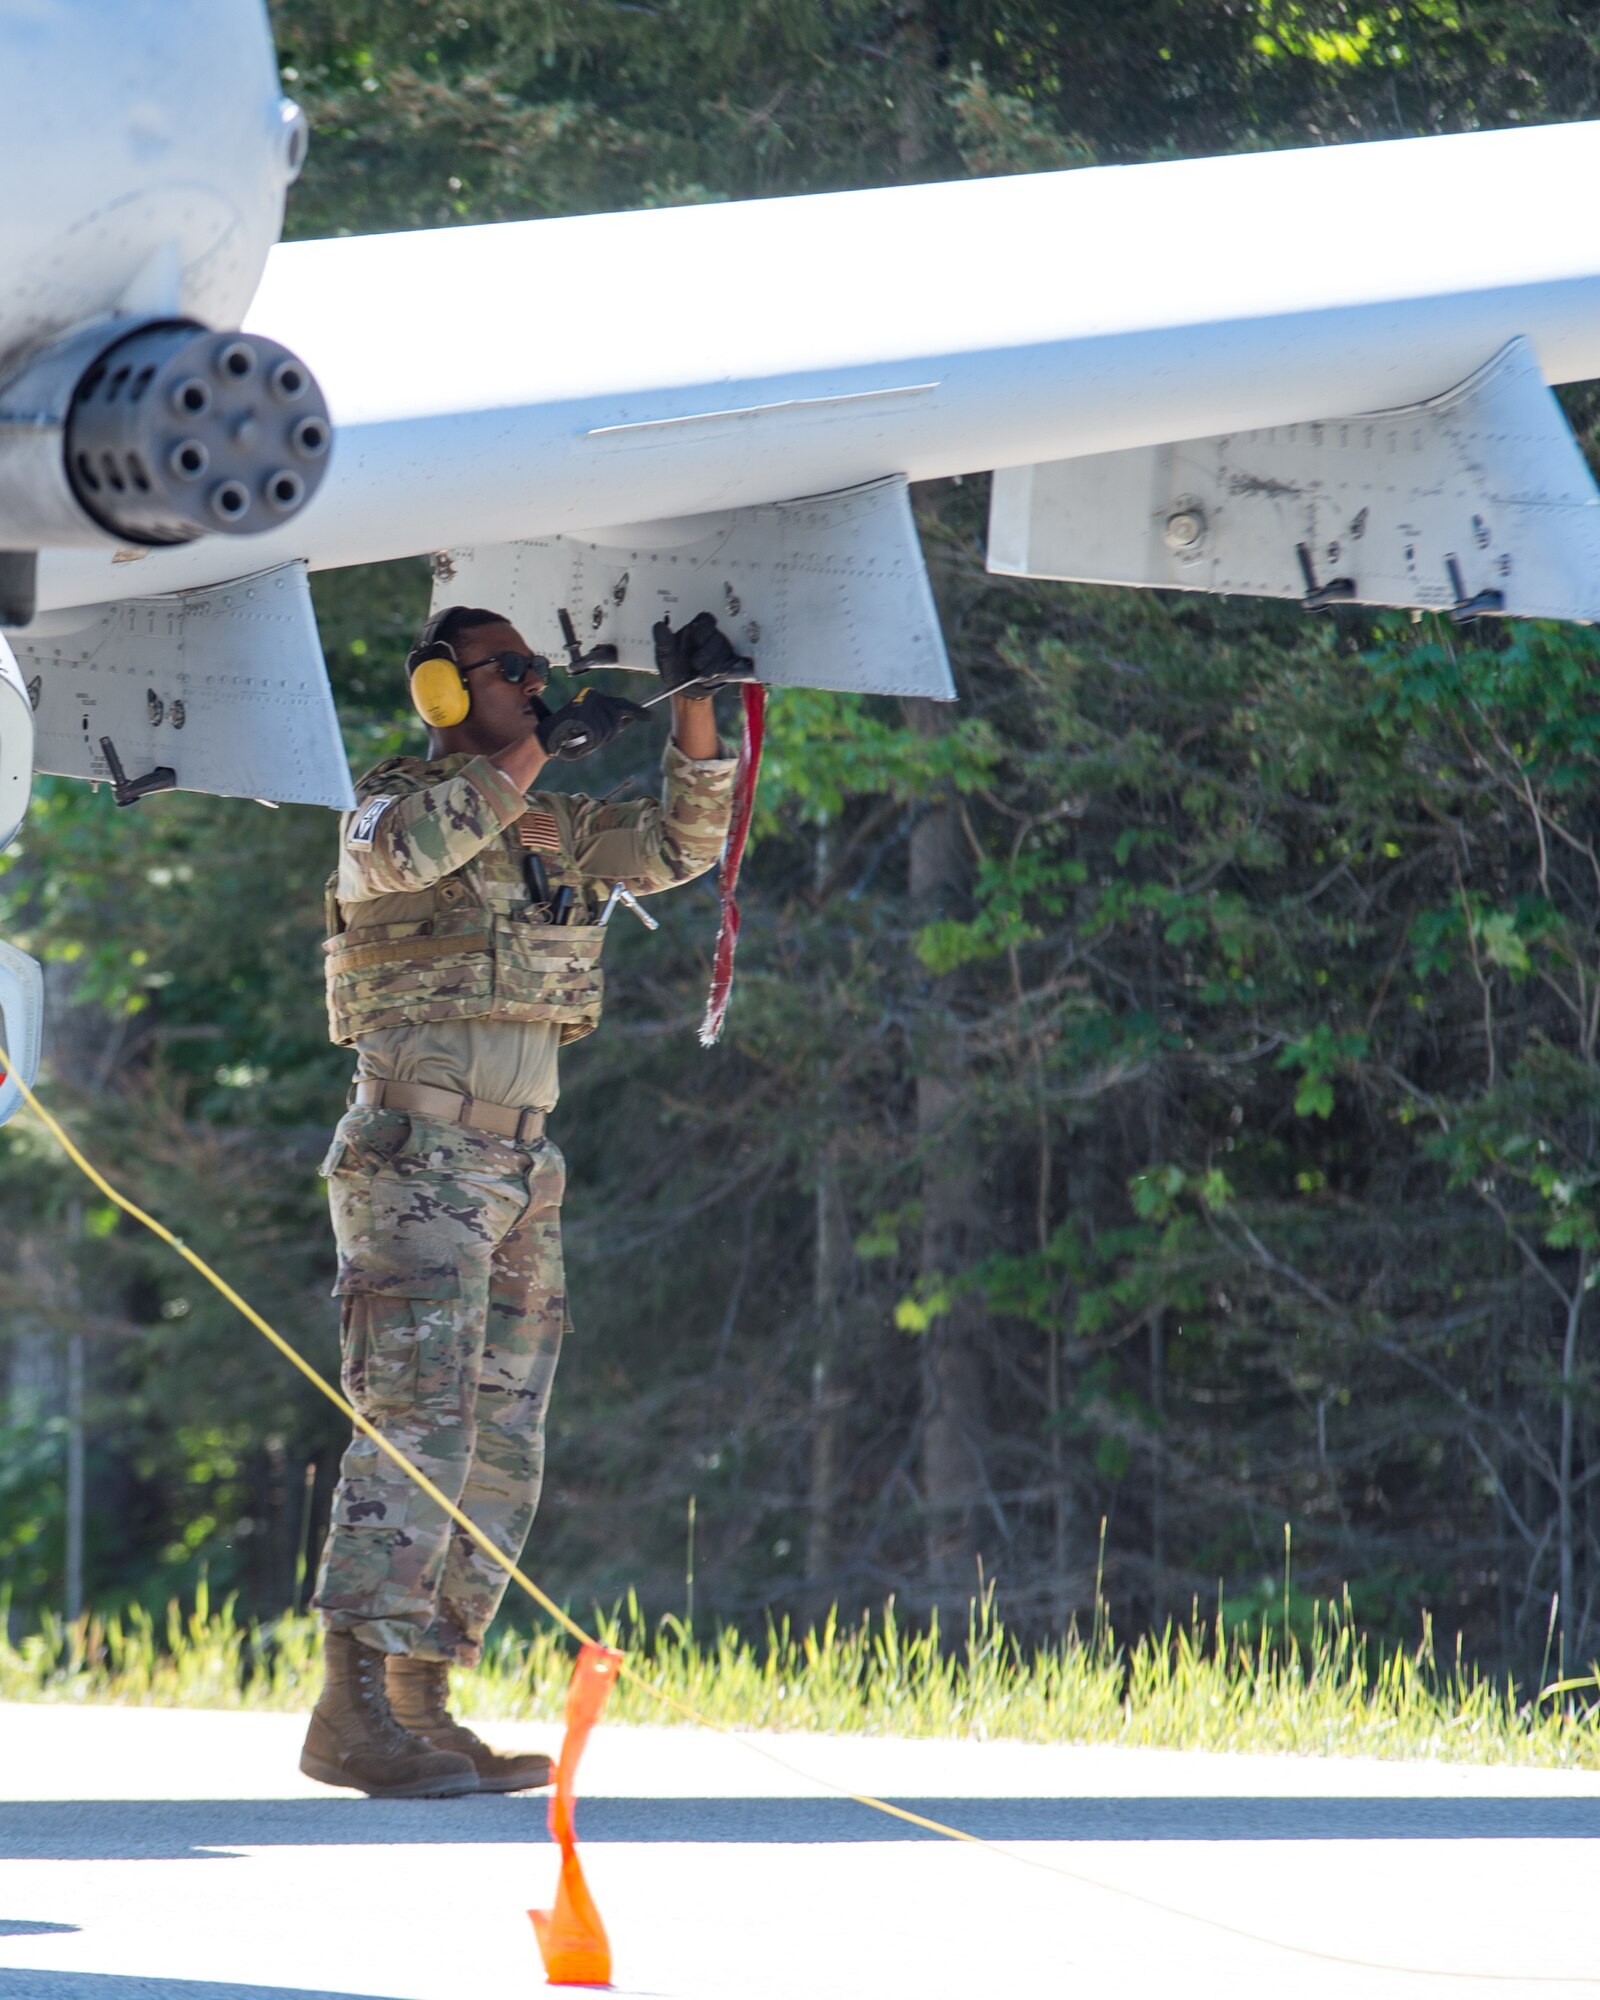 Tech. Sgt. Derrick Mason, a weapons technician with the 127th Maintenance Group, Selfridge Air National Guard Base, Michigan, loads a dummy missile on an A-10 Thunderbolt II during a simulated integrated combat turn on a closed portion of M-28 in Alger County, Michigan on June 29, 2022.